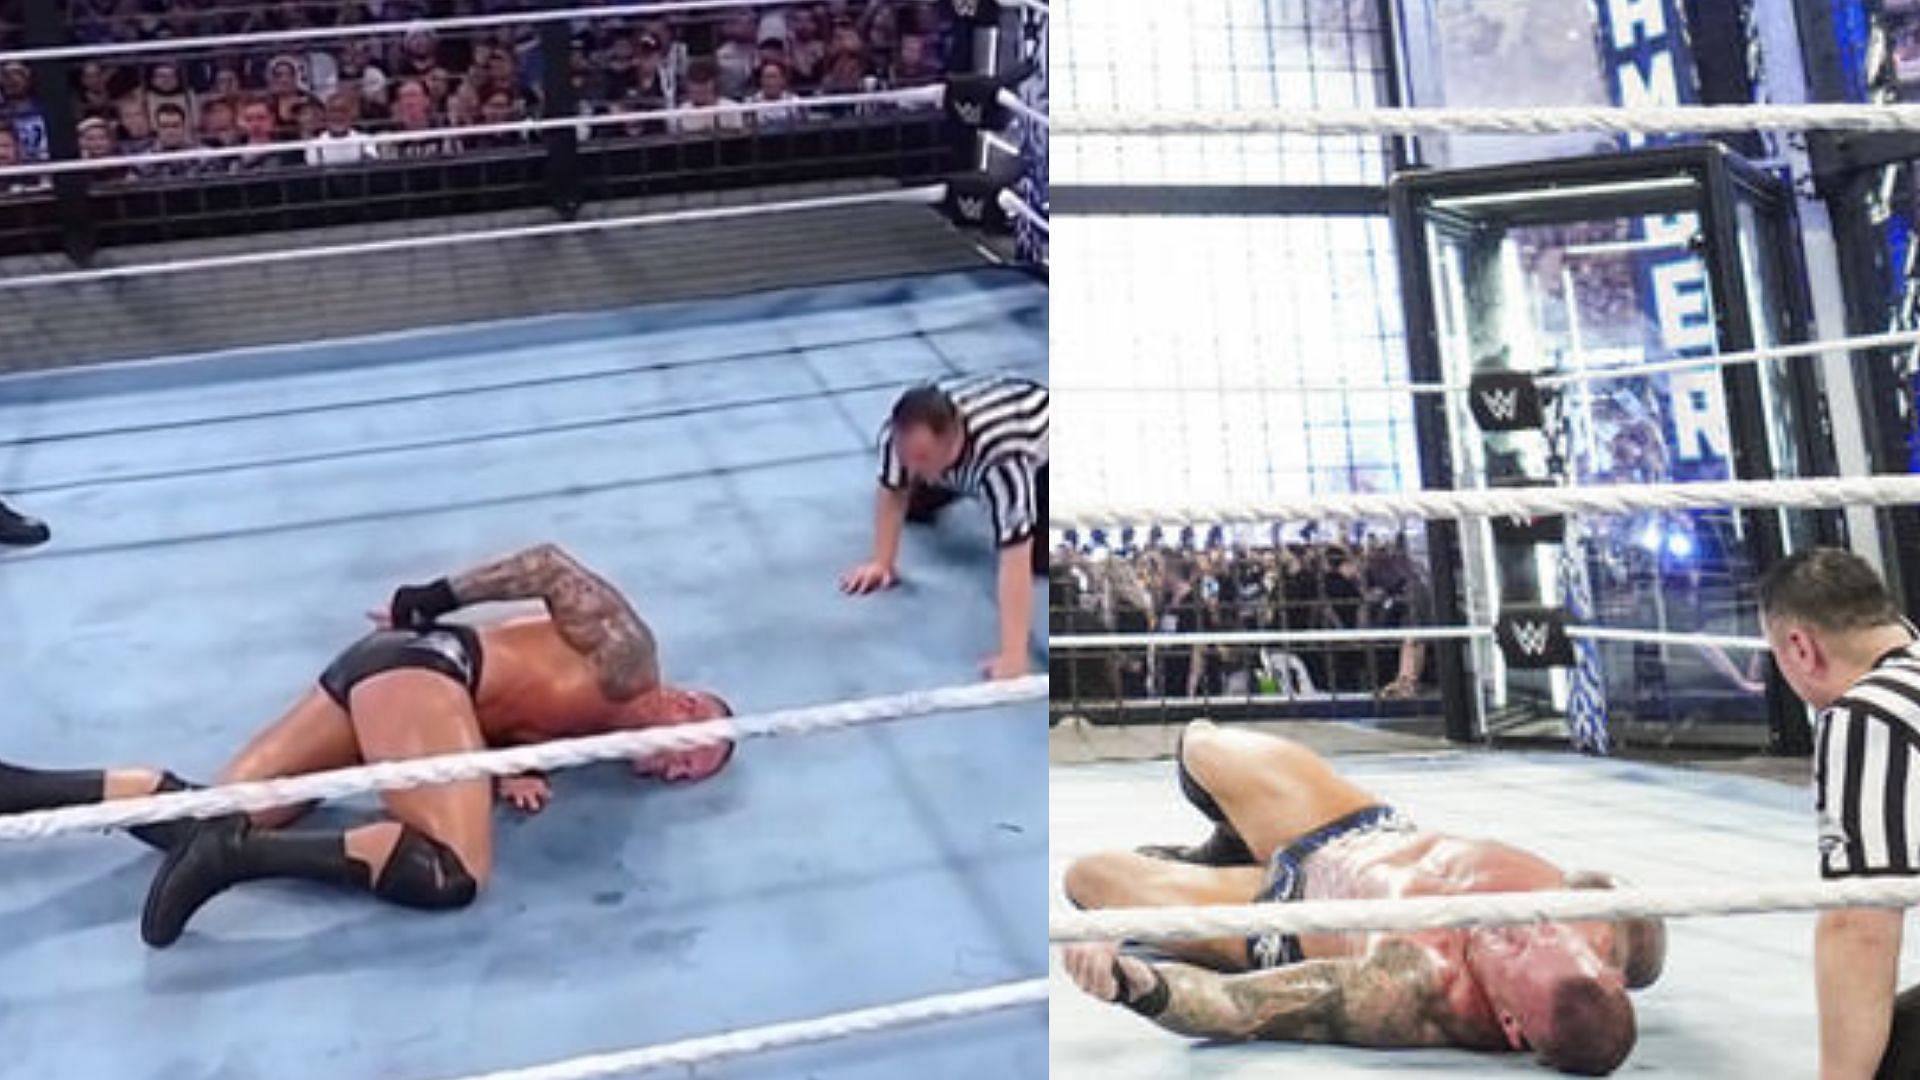 The star was left badly hurt after Elimination Chamber